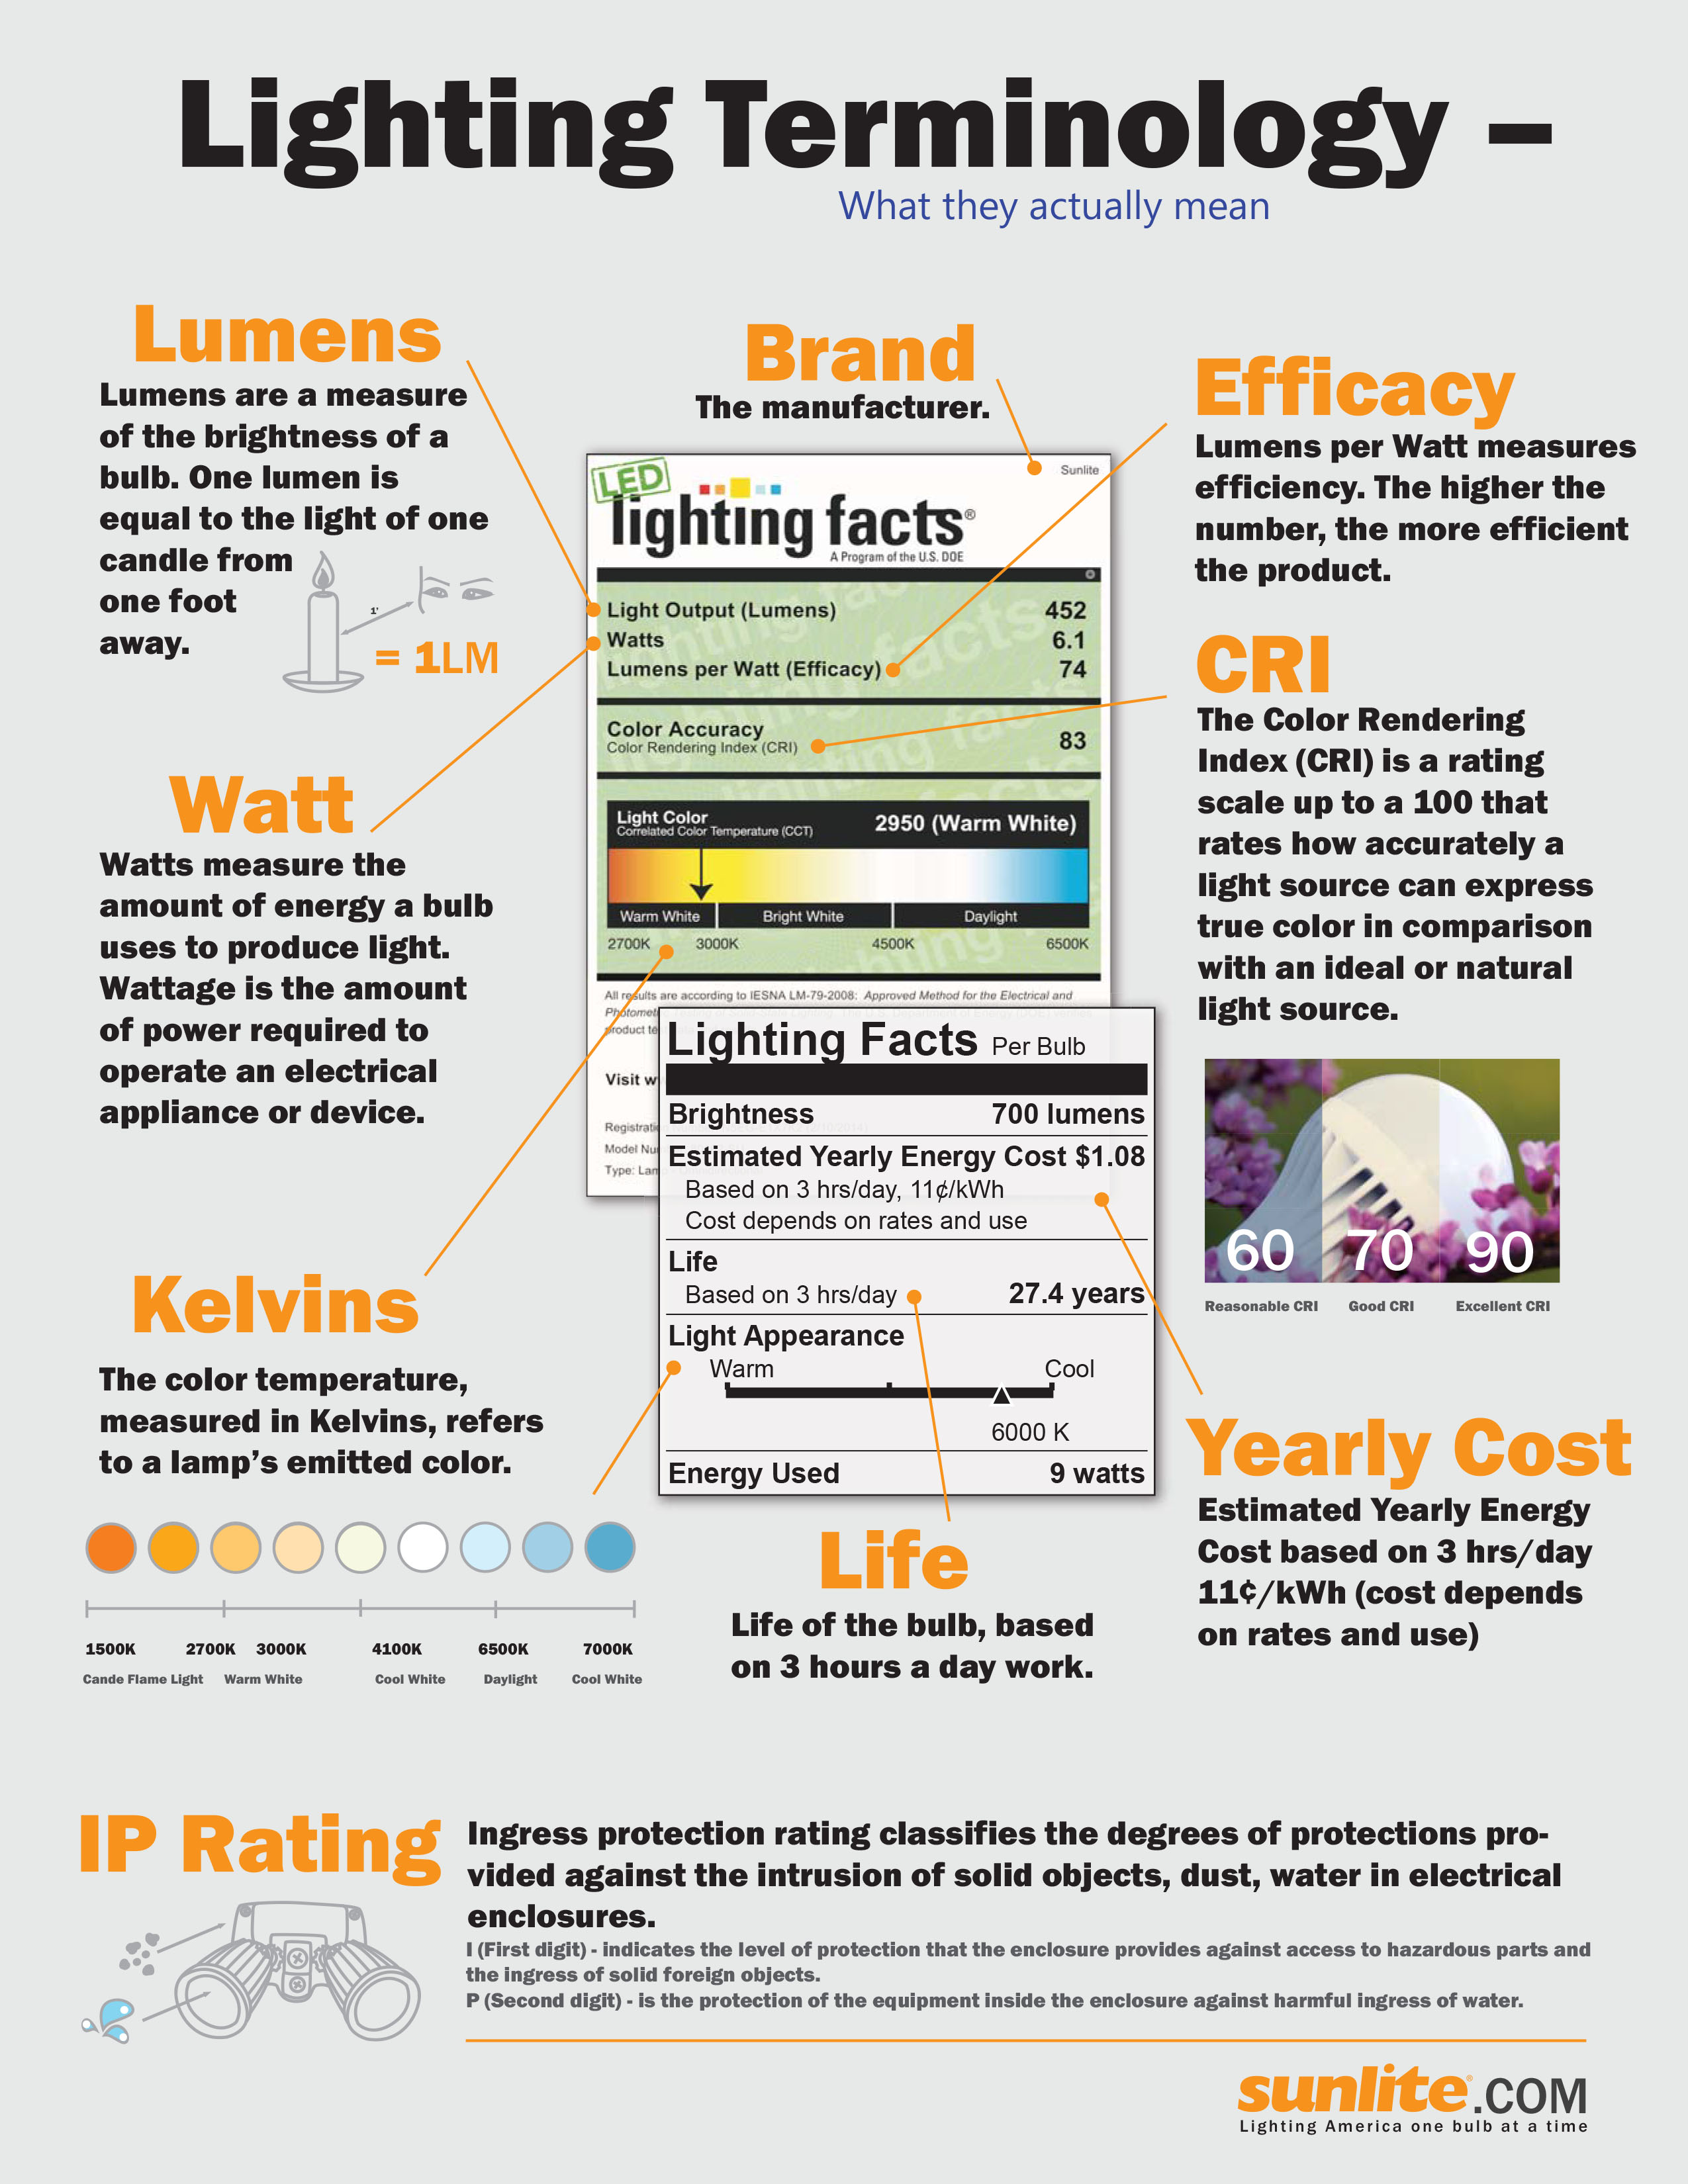 Specification-Grade Lighting Terminology: The Terms that Matter — Insights